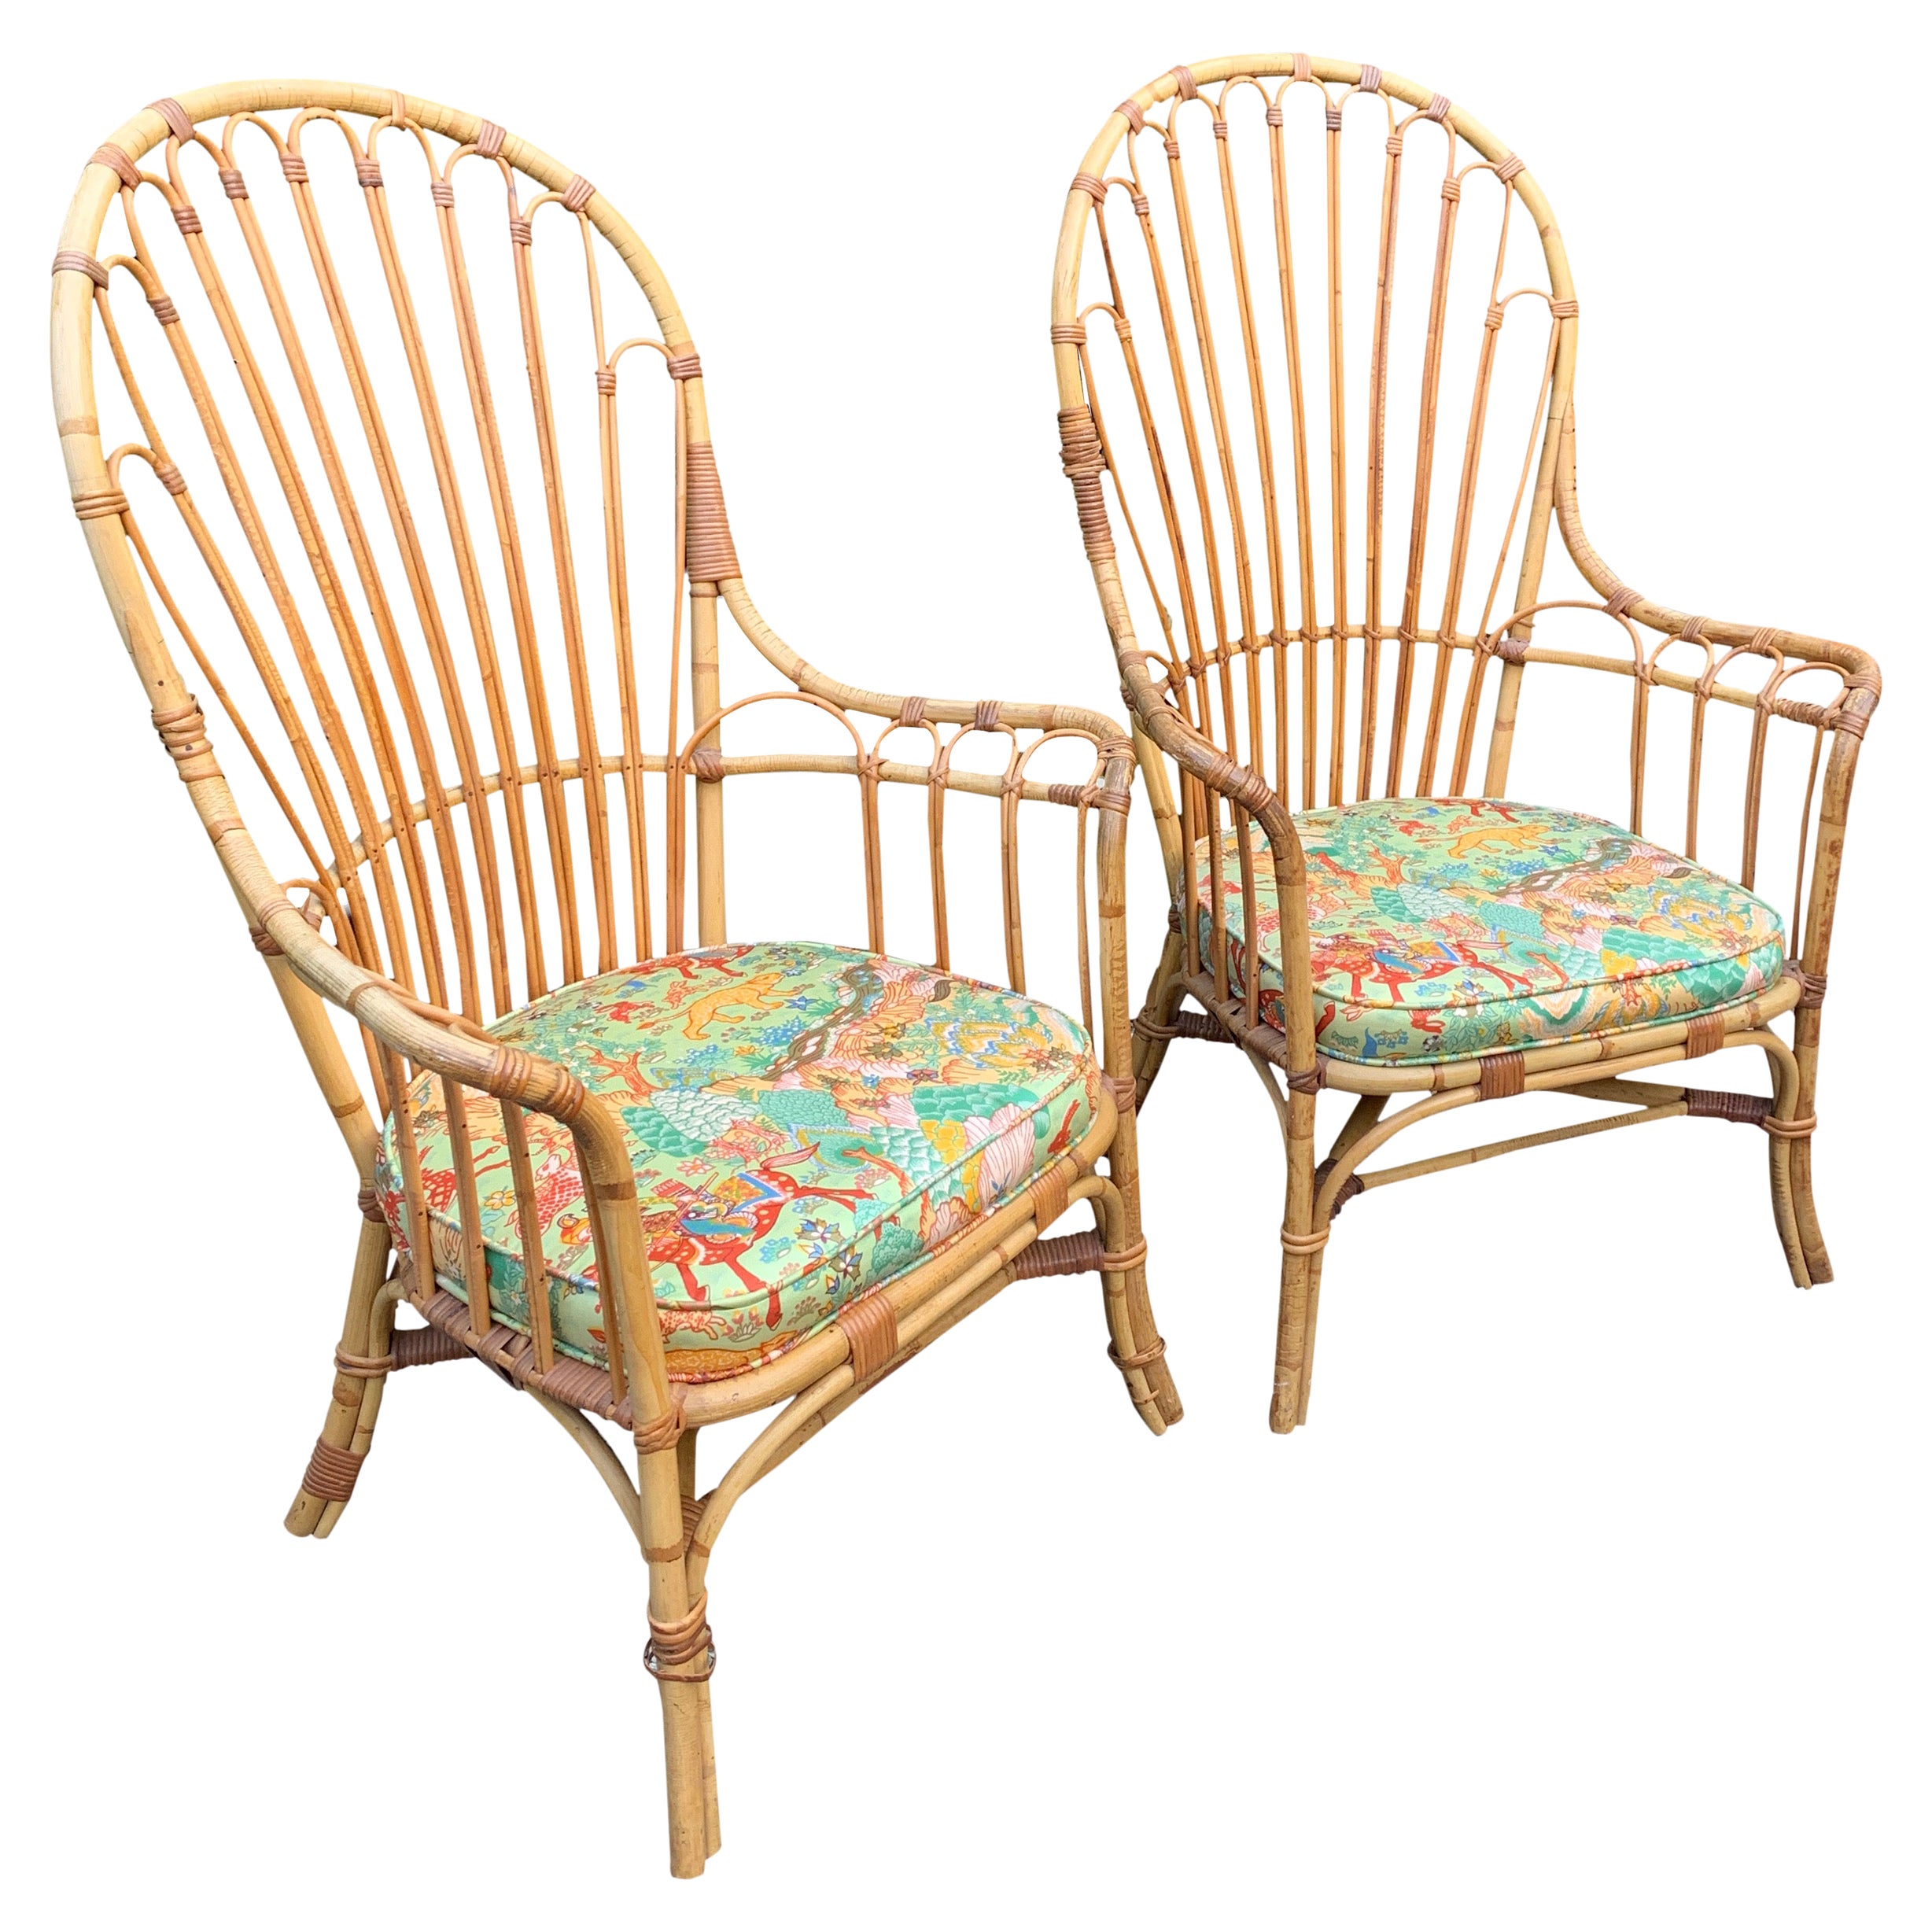 Pair of French Pencil Reed and Bamboo Rattan Wing Chairs